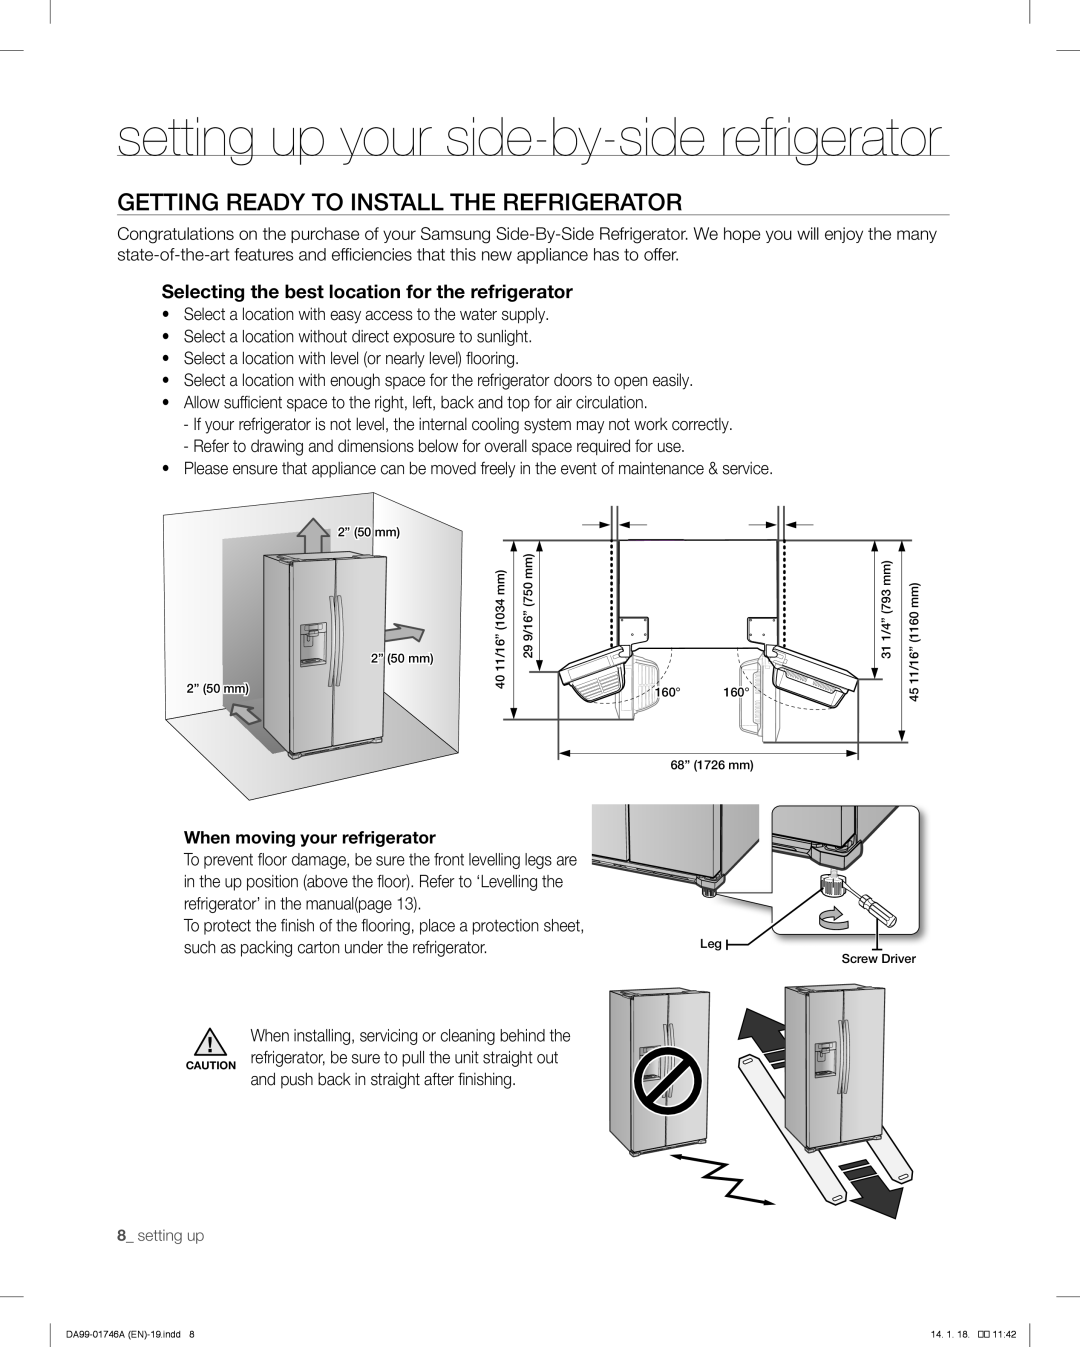 Samsung RSG257AA user manual setting up your side-by-side refrigerator, Getting Ready To Install The Refrigerator 